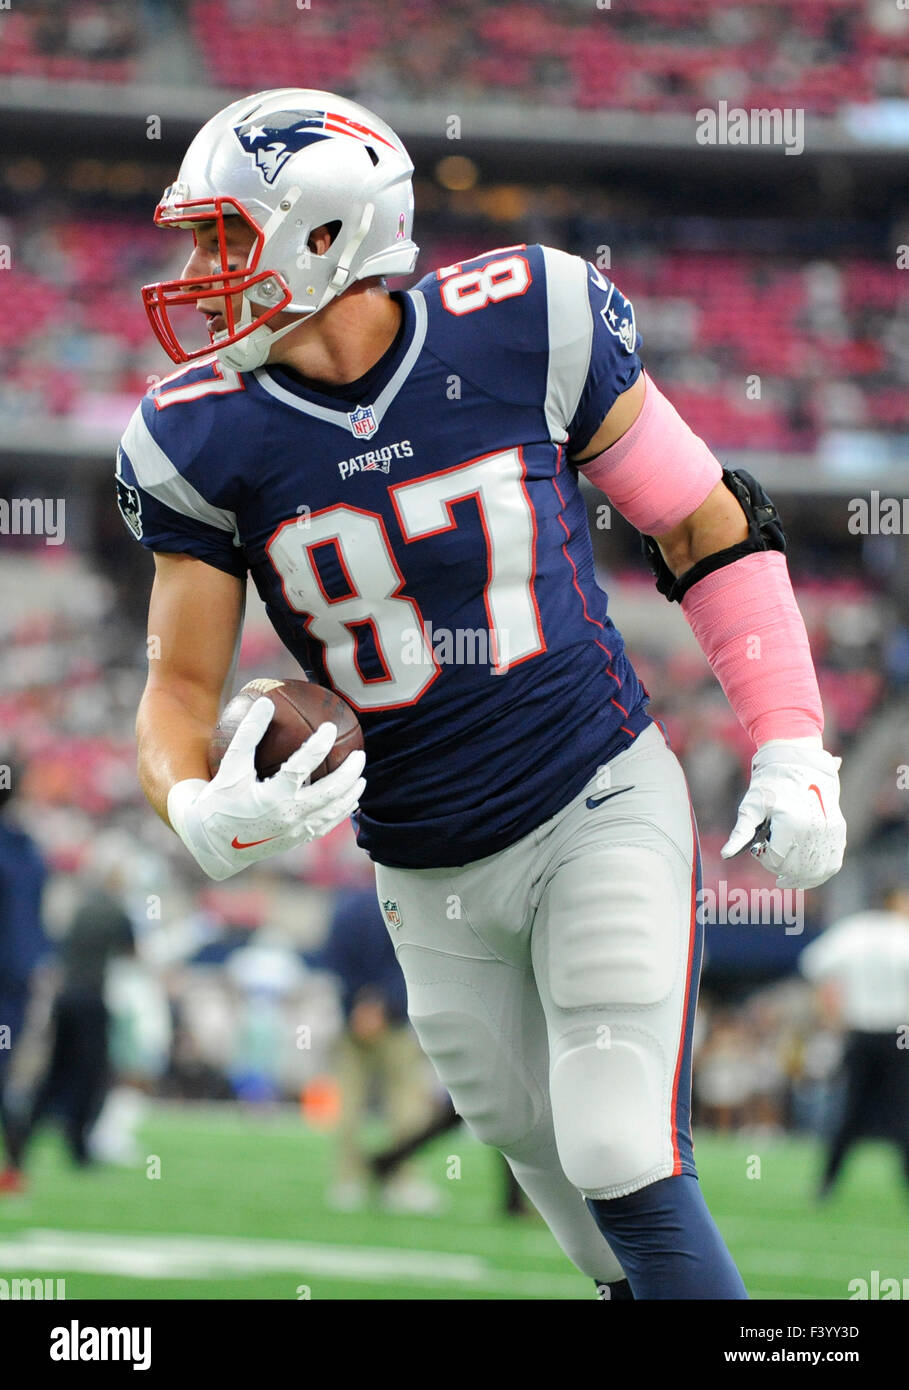 October 11, 2015: New England Patriots tight end Rob Gronkowski #87 during  an NFL football game between the New England Patriots and the Dallas  Cowboys at AT&T Stadium in Arlington, TX New